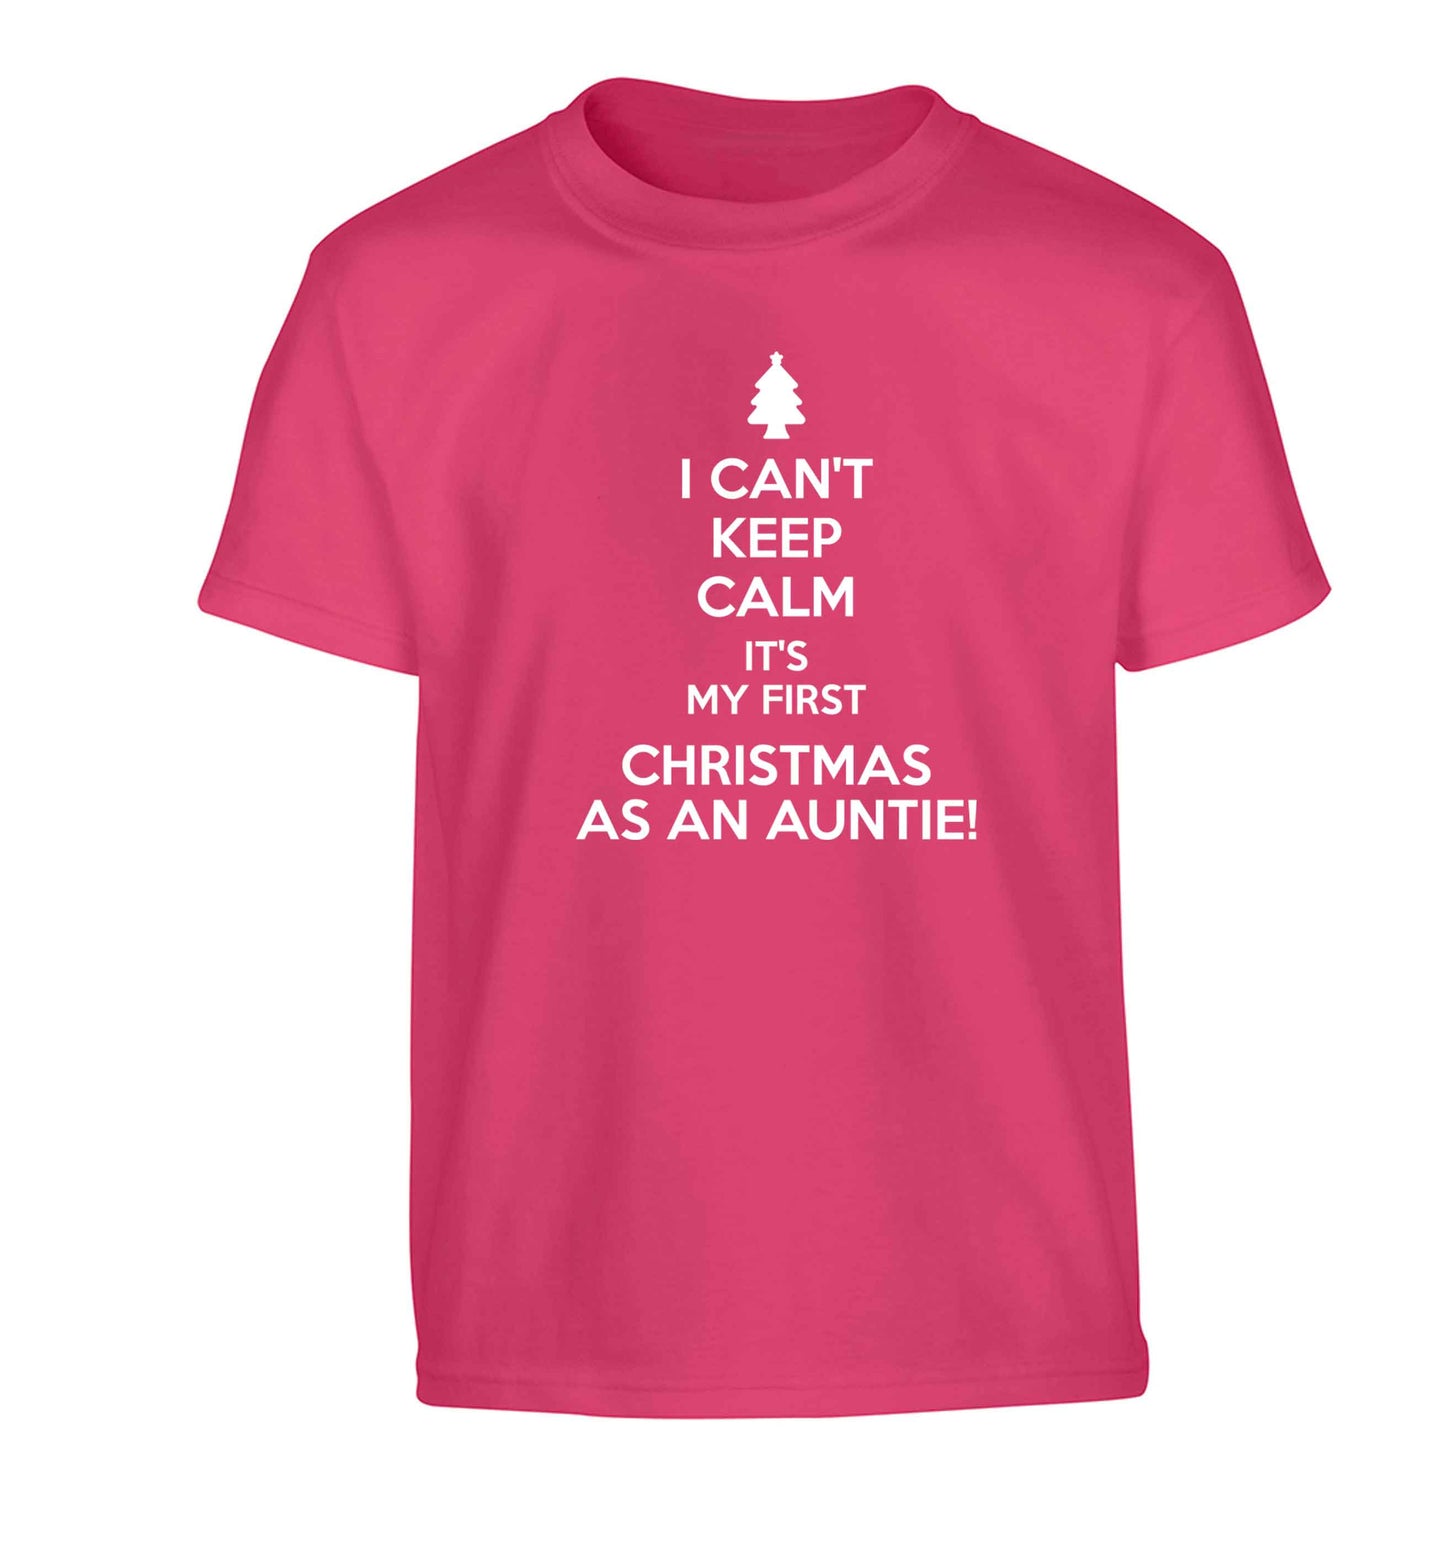 I can't keep calm it's my first Christmas as an auntie! Children's pink Tshirt 12-13 Years